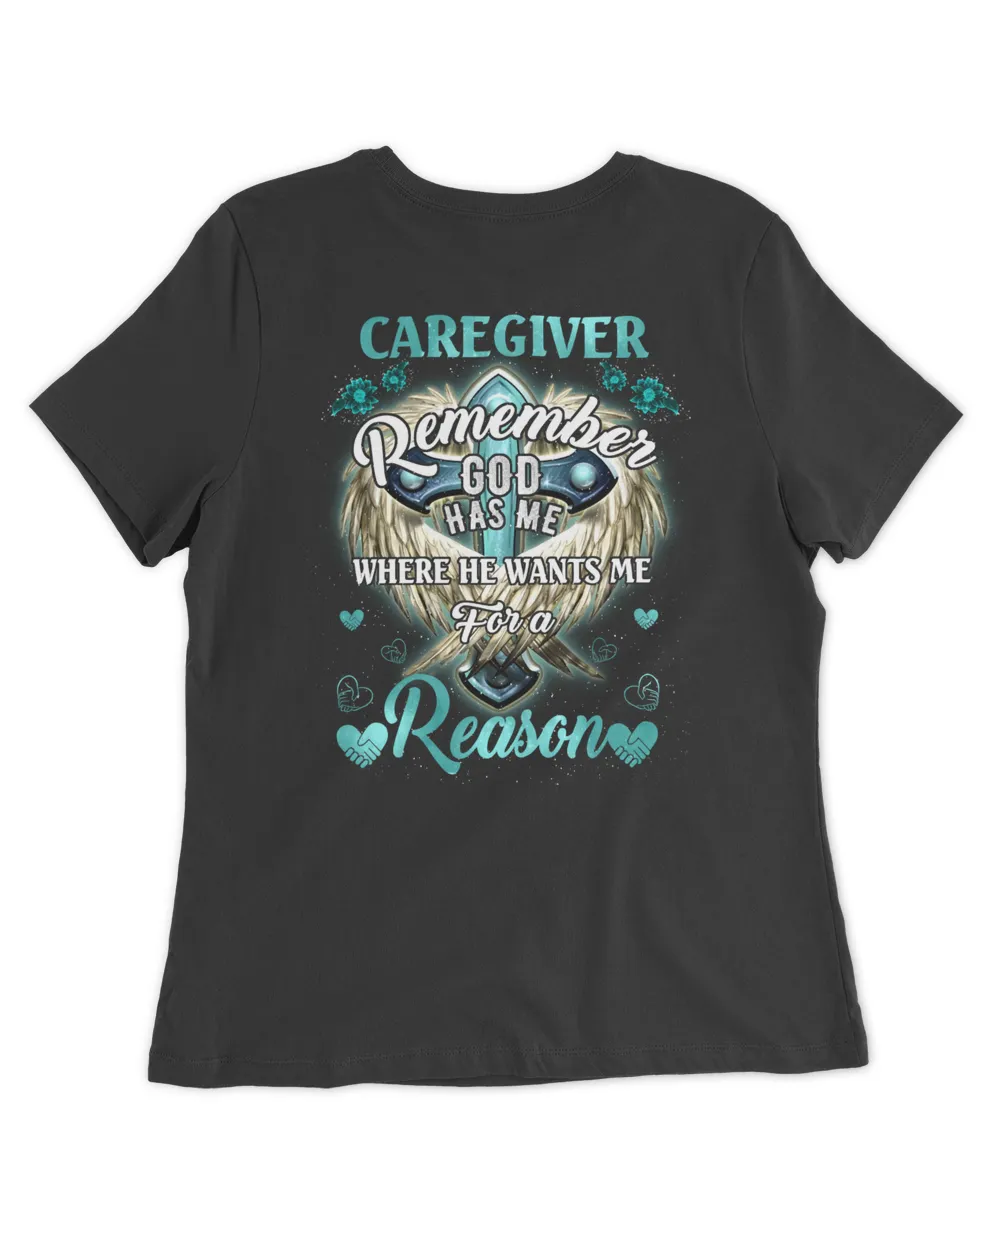 CAREGIVER REMEMBER GOD HAS ME WHERE HE WANTS ME FOR A REASON